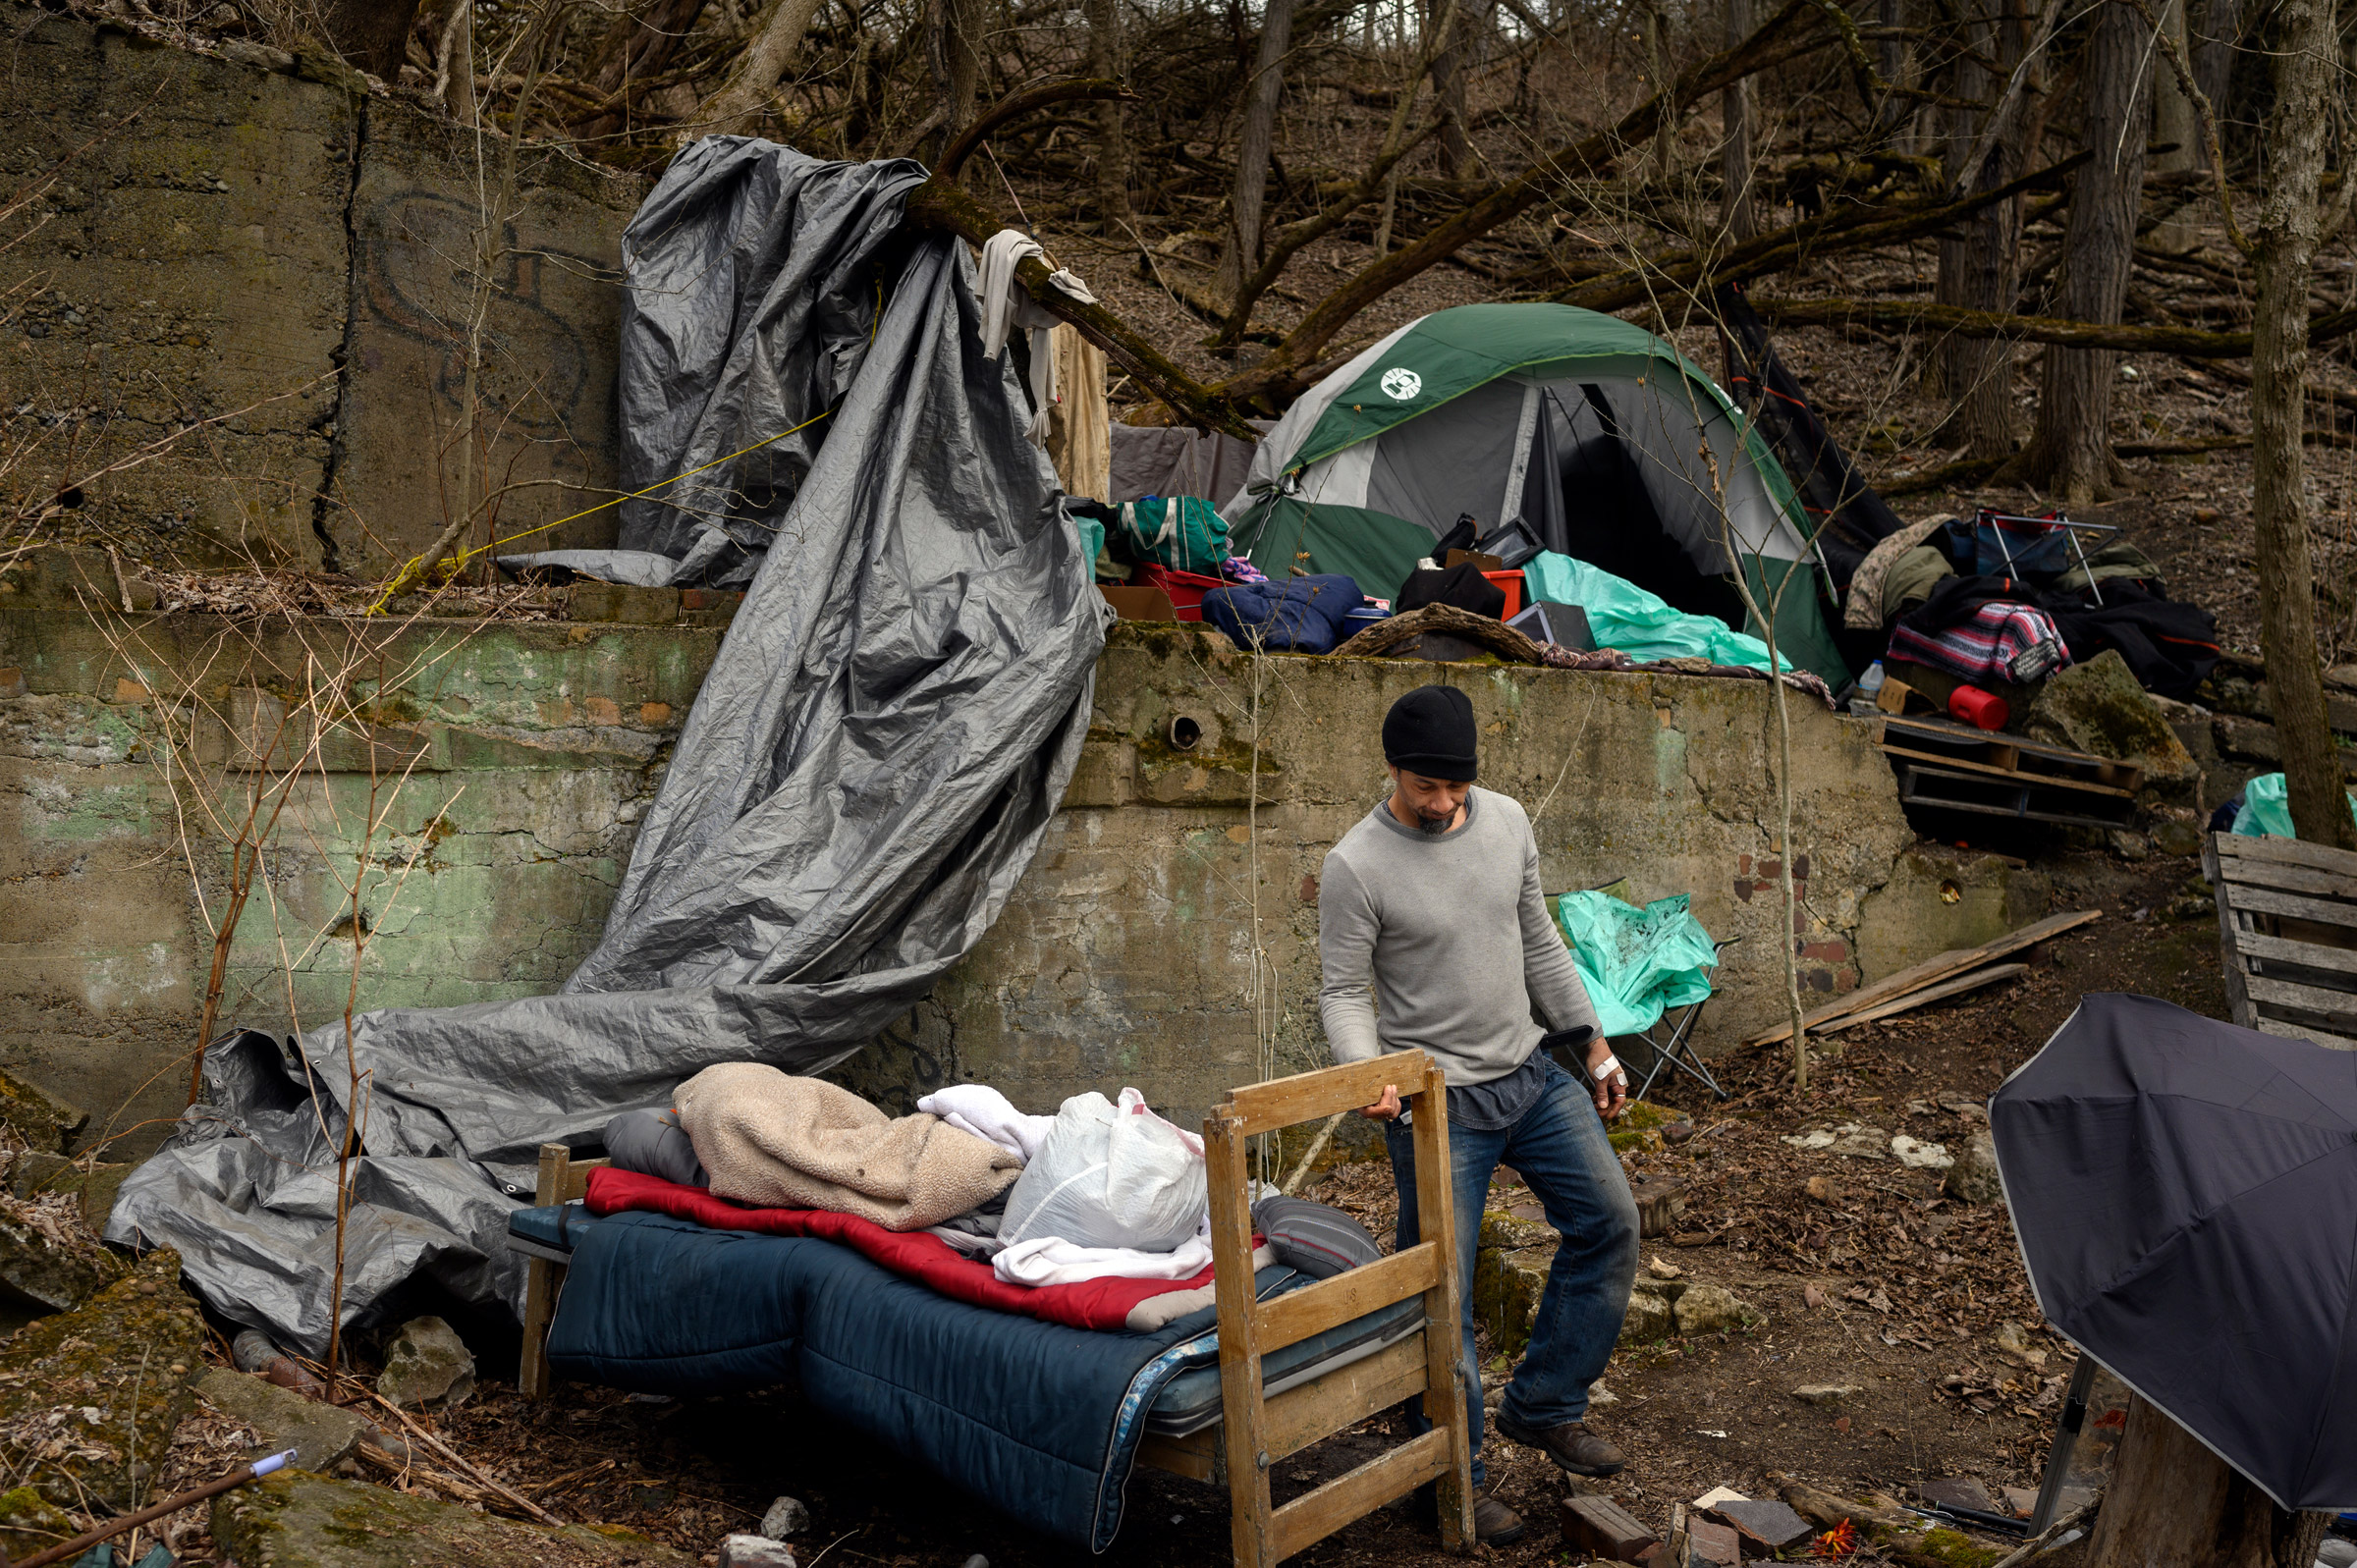 A man who goes by the name “Seven” builds up his tent encampment in Wheeling, WV on March 16, 2021. When the Winter Freeze shelter closed for the year, the unhoused population had to prepare to live outside for the remainder of the year.